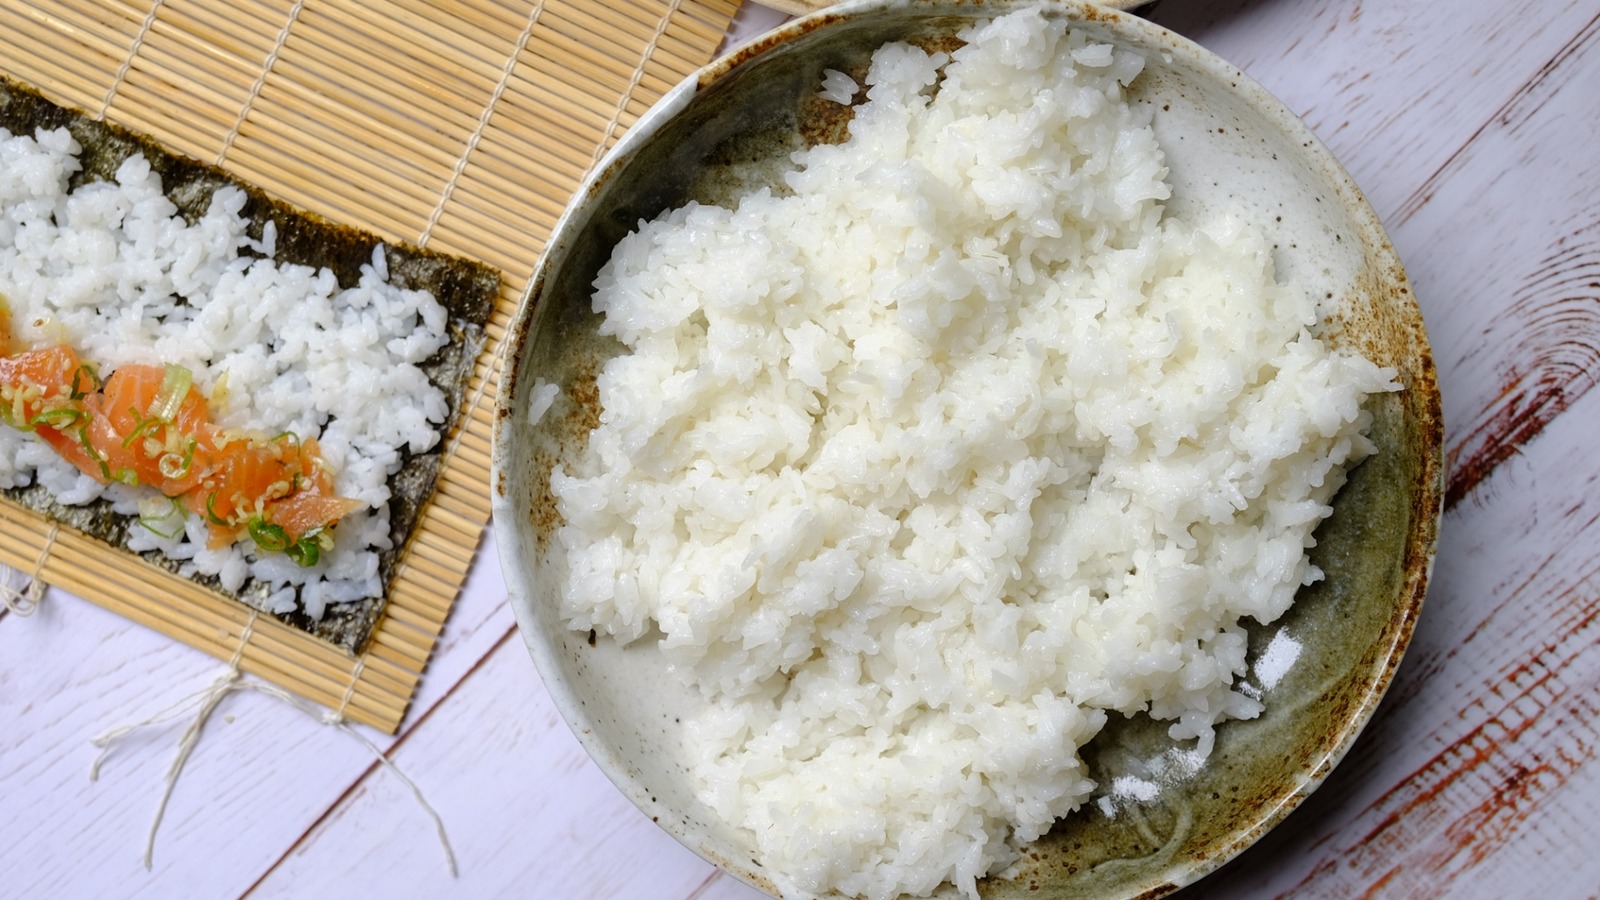 https://www.mashed.com/img/gallery/traditional-sushi-rice-recipe/l-intro-1661437557.jpg